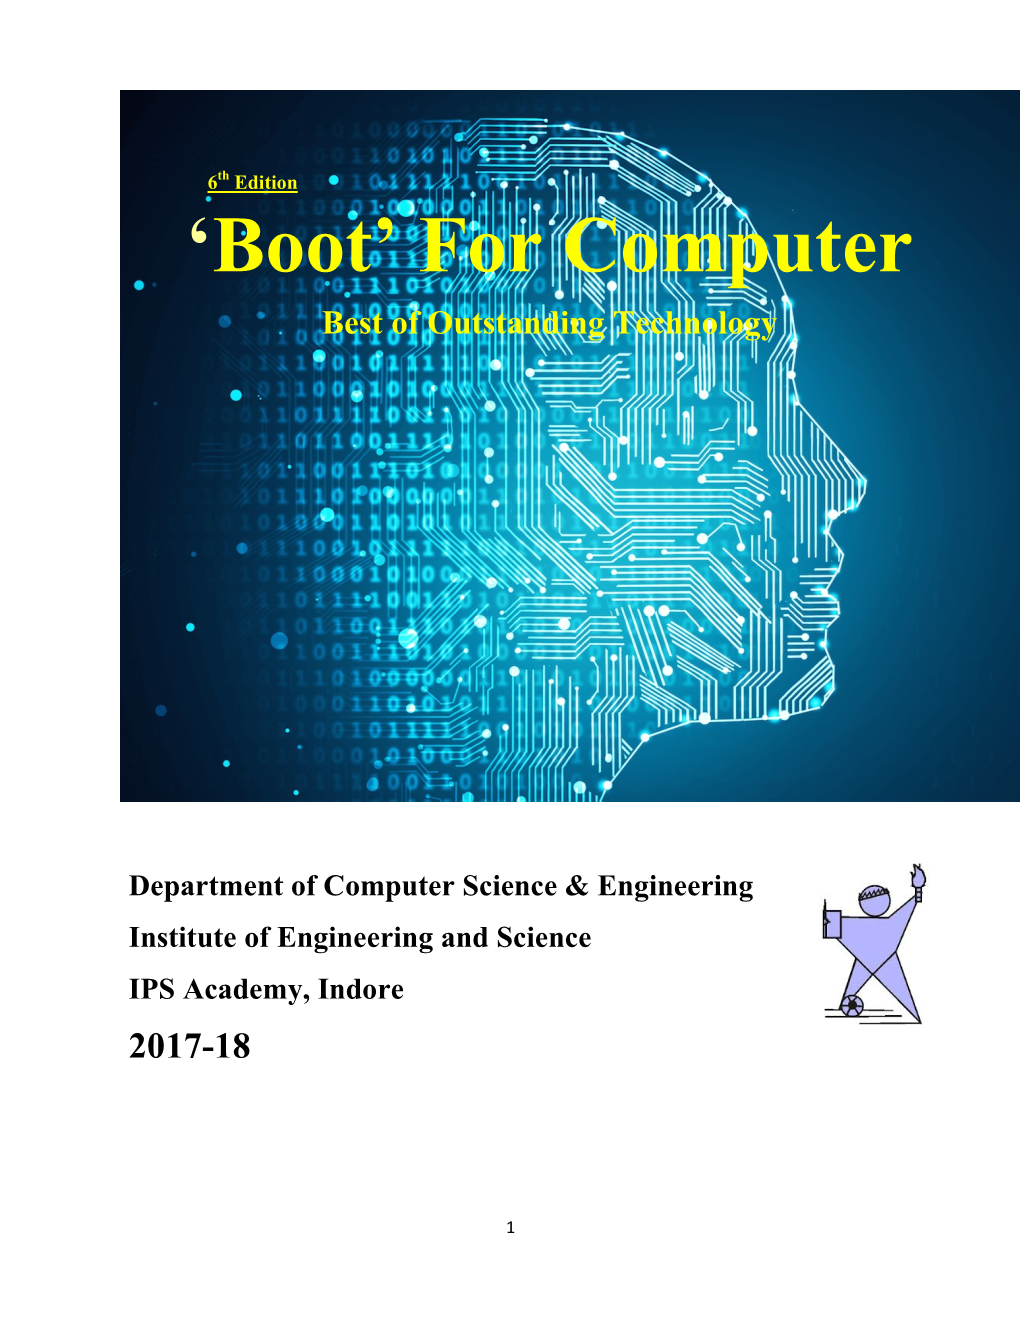 Boot’ for Computer Best of Outstanding Technology